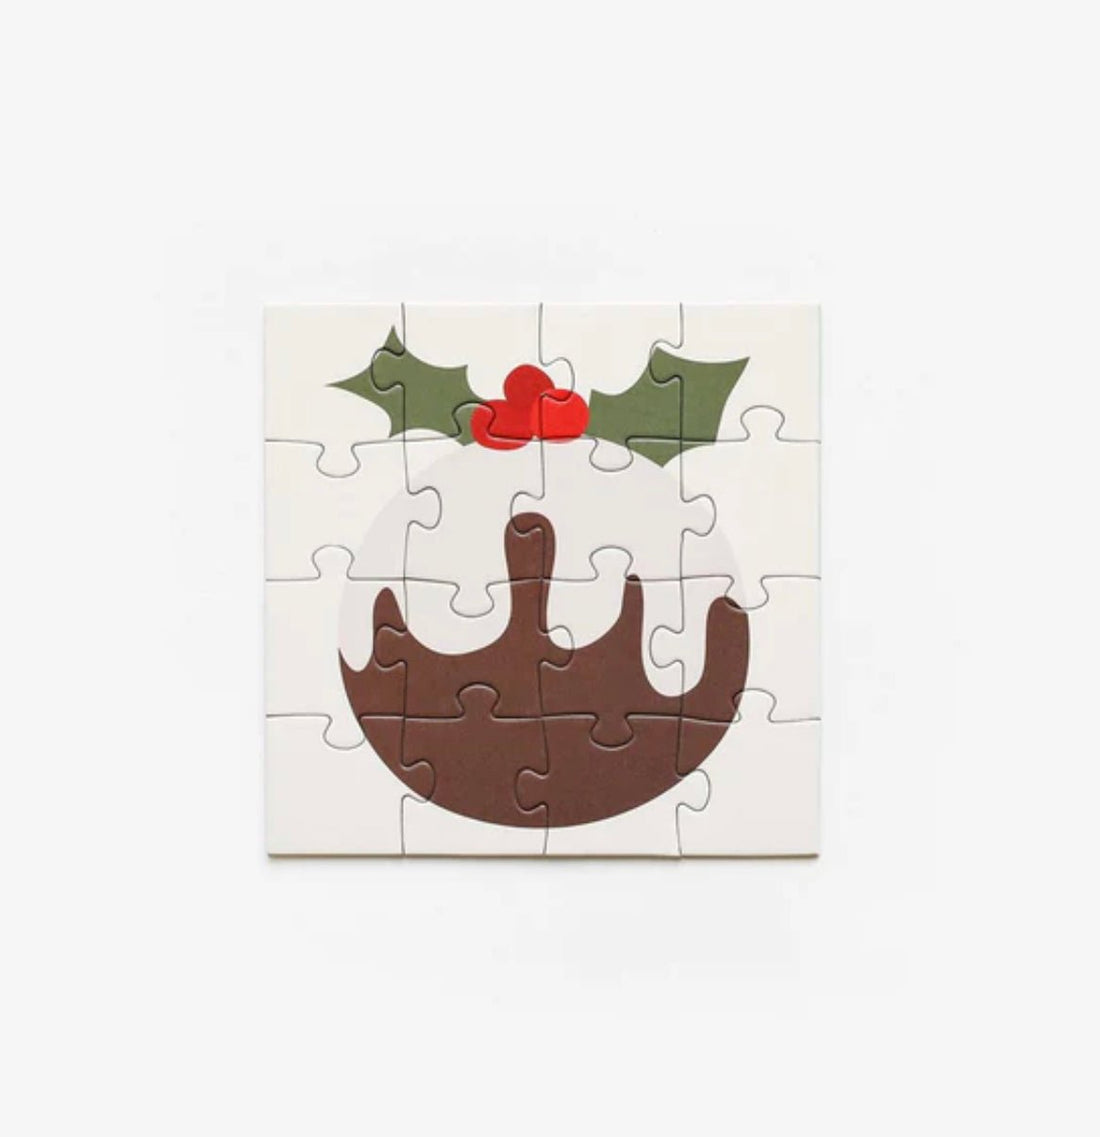 Xmas Pudding 16 Piece Puzzle - The Flower Crate